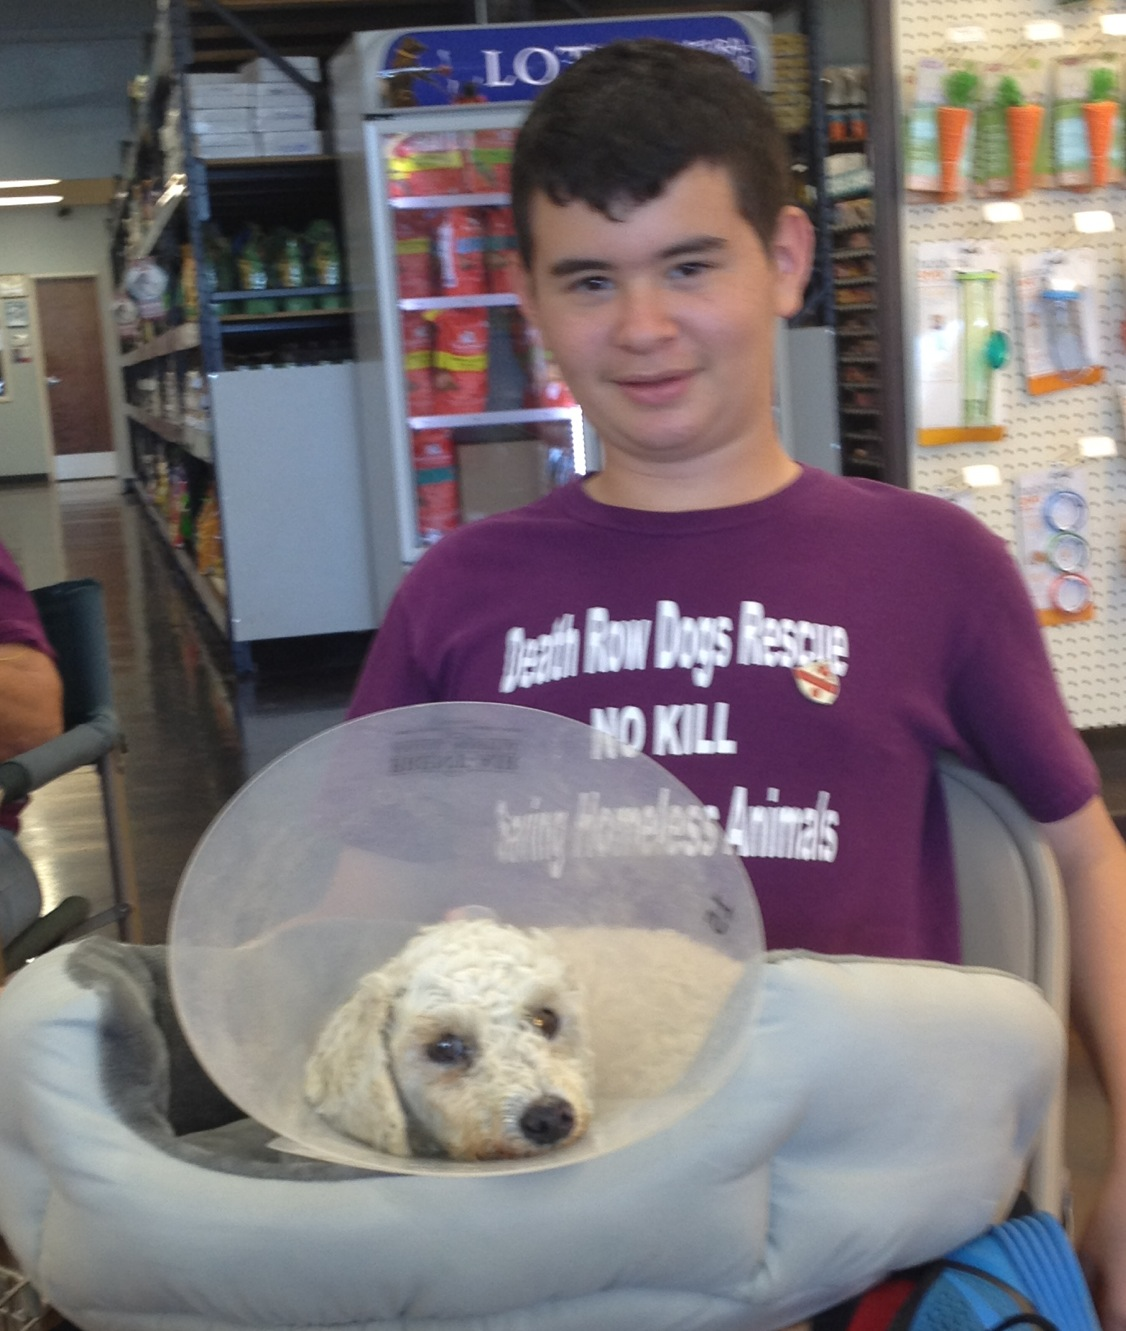 Brandon is our Volunteer Coordinator at our adoption events. We appreciate his time, knowledge and compassion for the animals.